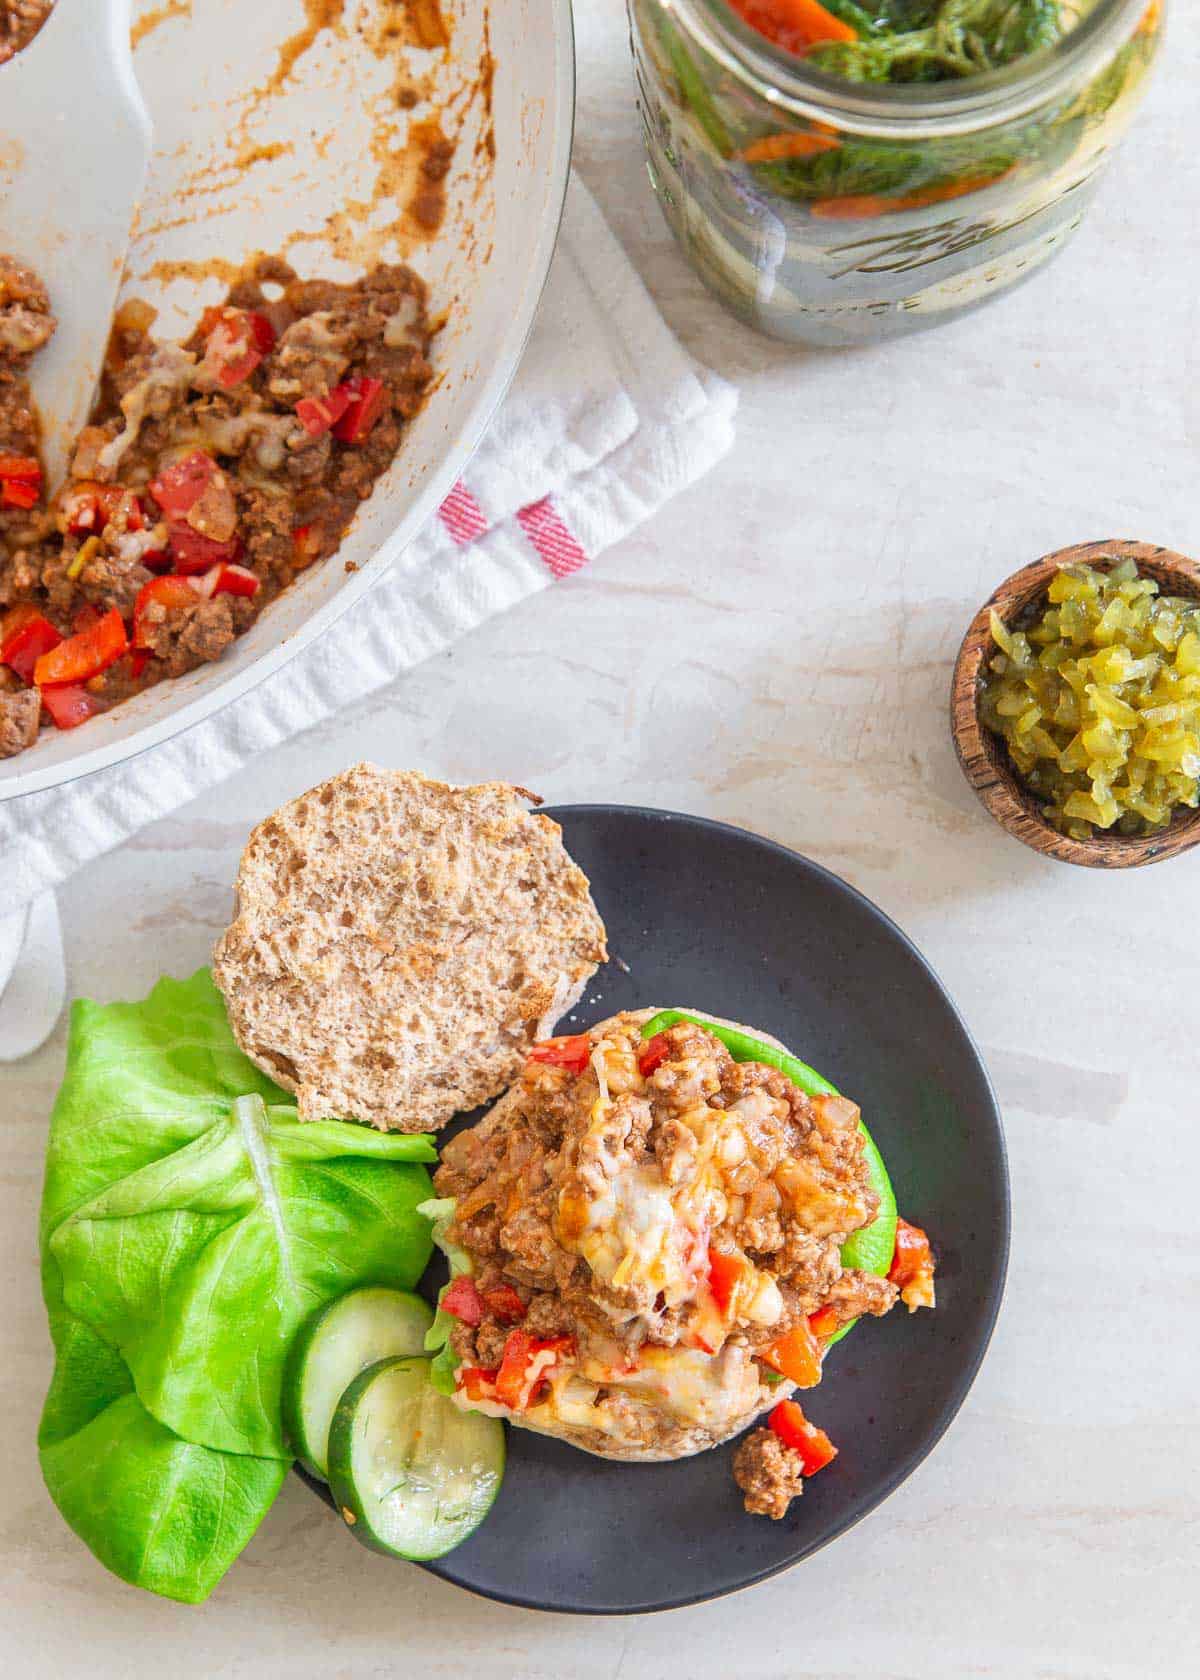 These healthy sloppy joes have all the comforting elements of the classic recipe without the guilt!